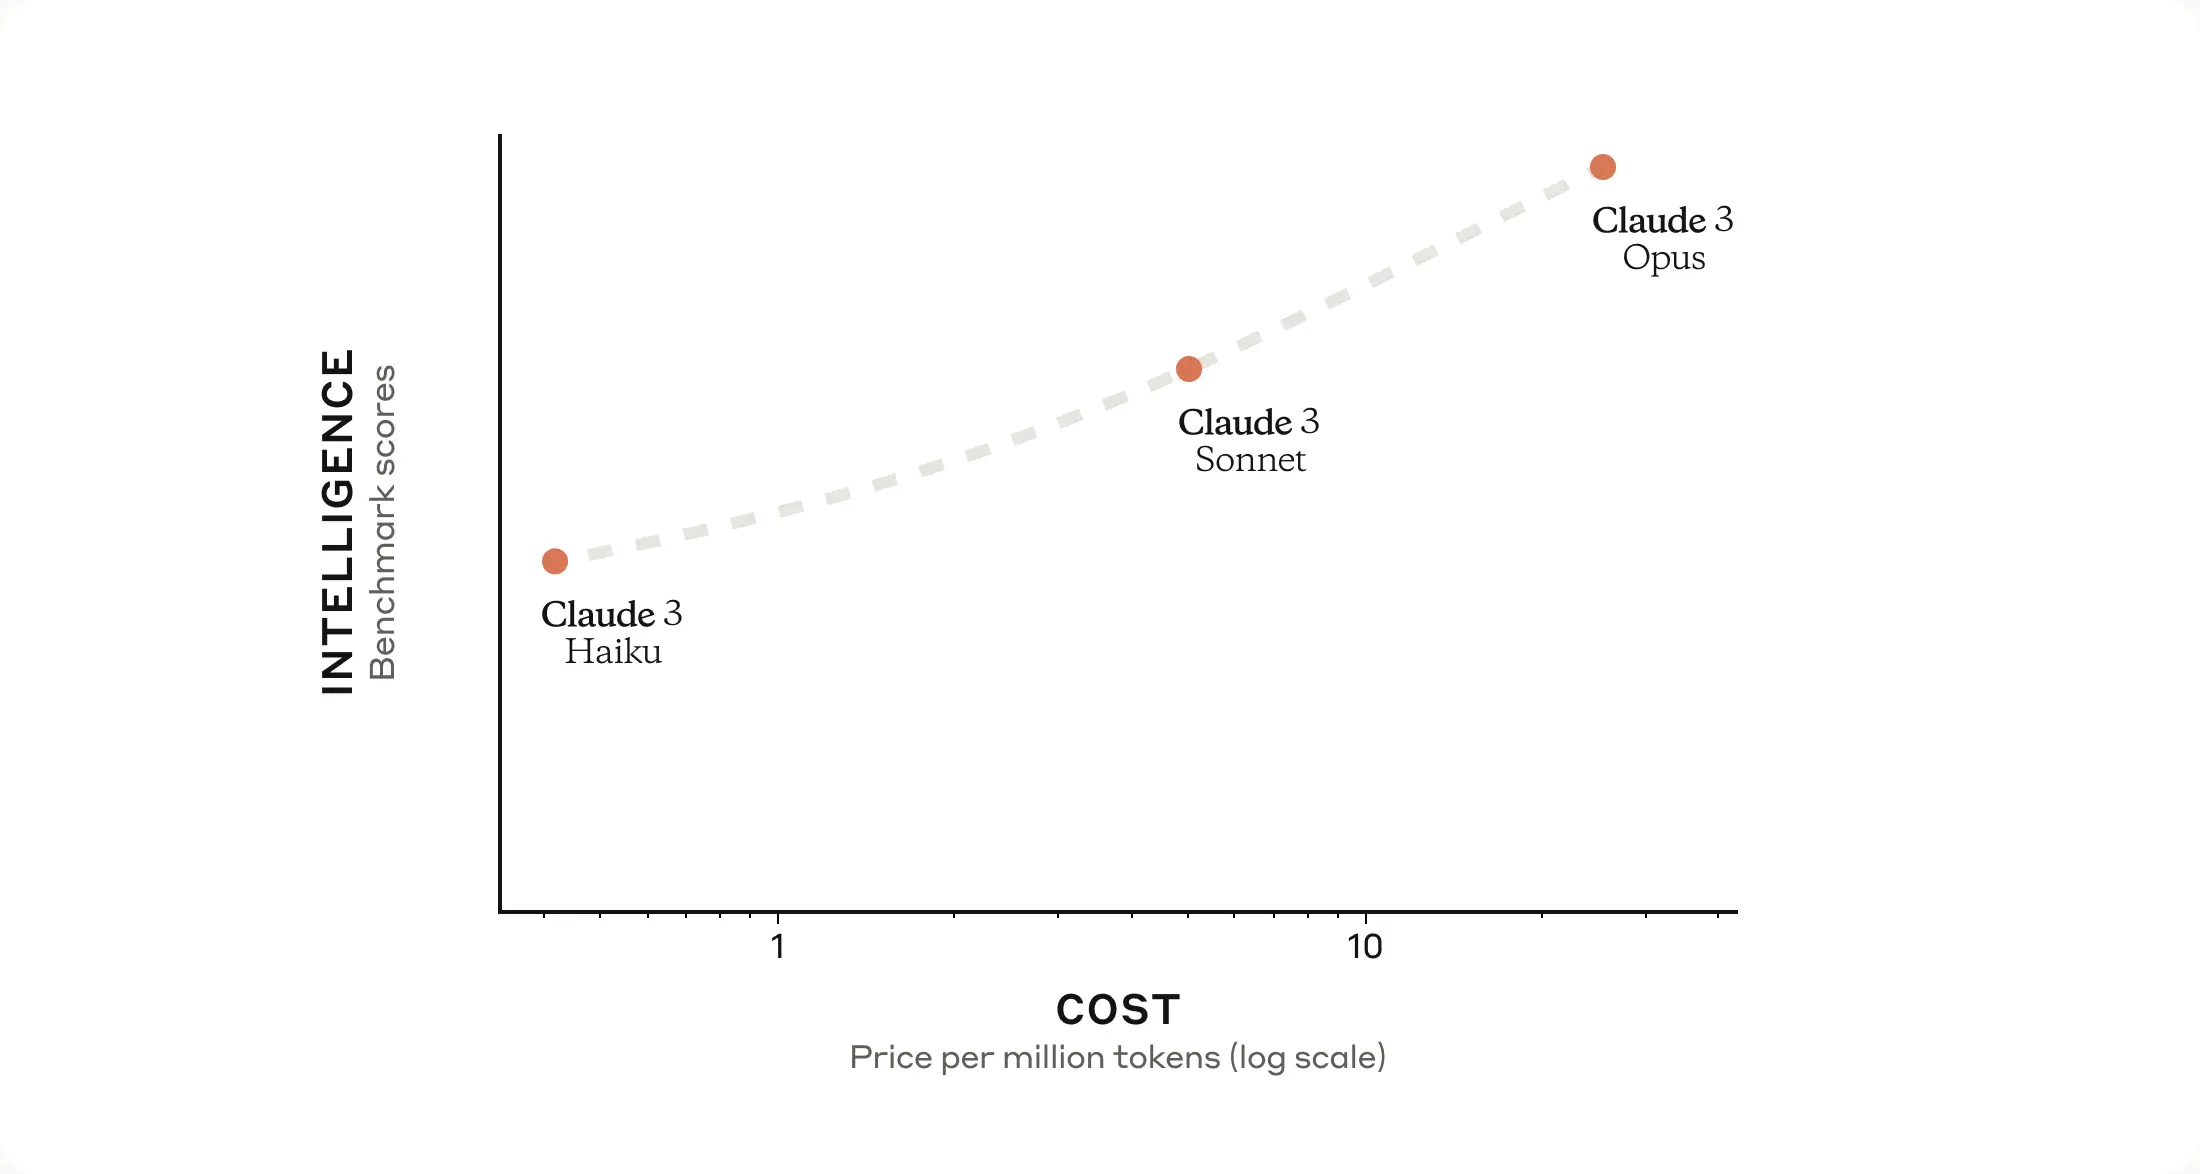 Price per million tokens that compares the three model types of Claude AI